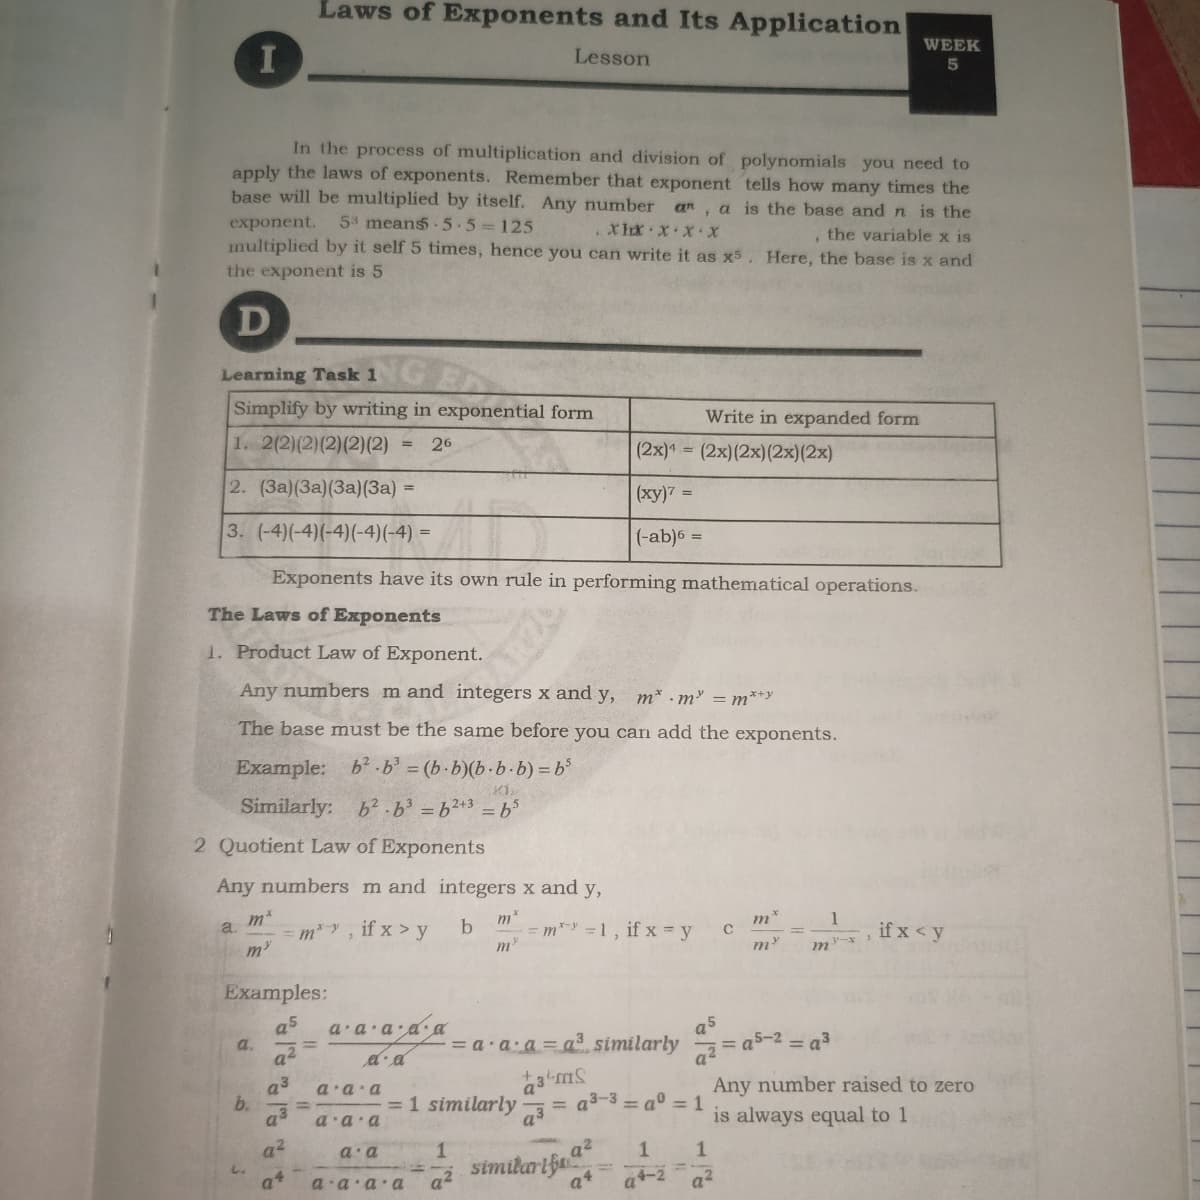 Laws of Exponents and Its Application
WEEK
I
Lesson
5
In the process of multiplication and division of polynomials you need to
apply the laws of exponents. Remember that exponent tells how many times the
base will be multiplied by itself. Any number an, a is the base and n is the
exponent.
53 means 5-5 125
XHx XXx
, the variable x is
multiplied by it self 5 times, hence you can write it as x5. Here, the base is x and
the exponent is 5
D
Learning Task 1
Simplify by writing in exponential form
Write in expanded form
1. 2(2)(2)(2)(2)(2)
26
%3D
(2x) = (2x)(2x)(2x)(2x)
2. (3a)(3a)(3a)(3a) =
(xy)7 =
3. (-4)(-4)(-4)(-4)(-4) =
(-ab)6 =
Exponents have its own rule in performing mathematical operations.
The Laws of Exponents
1. Product Law of Exponent.
Any numbers m and integers x and y, m* -m = m*+y
The base must be the same before you can add the exponents.
Example: b-b (b-b)(b.b.b) = b
Similarly:
b2.63 =62+3 =b%
2 Quotient Law of Exponents
Any numbers m and integers x and y,
m*
=m* =1, if x = y
m*
1
m*, if x > y
if x < y
a
m
m
m
Examples:
a5
a a a aa
a5
a.
a
= a a a = a3 similarly
= a3
a3
b.
a3
a a a
Any number raised to zero
= a3-3 = a0 = 1
=1 similarly
a3
is always equal to 1
a a a
a?
a a
a2
1
similarifu
a+
a2
a?
D.v. v.D
18
